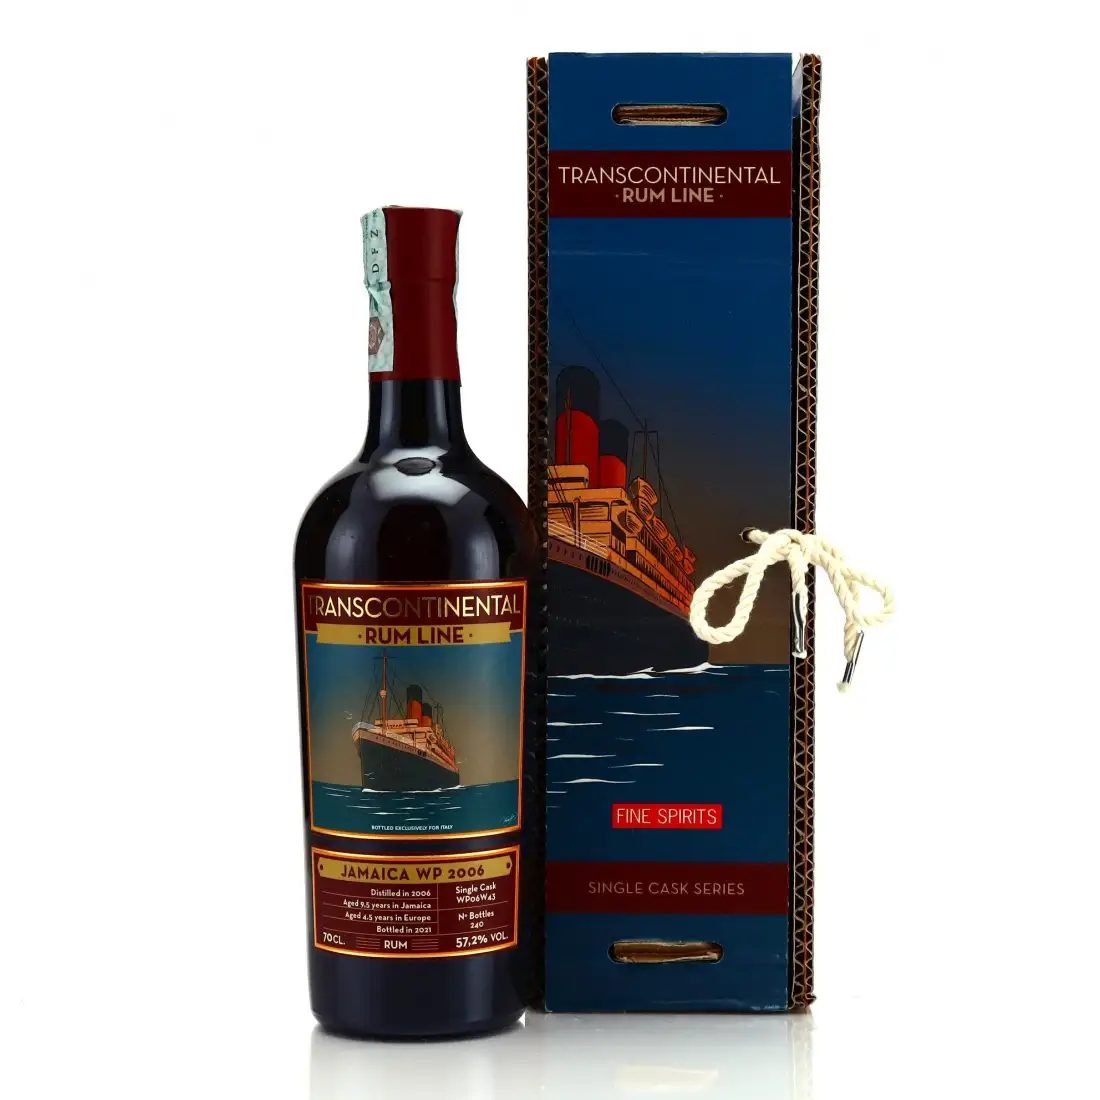 Image of the front of the bottle of the rum Jamaica WP